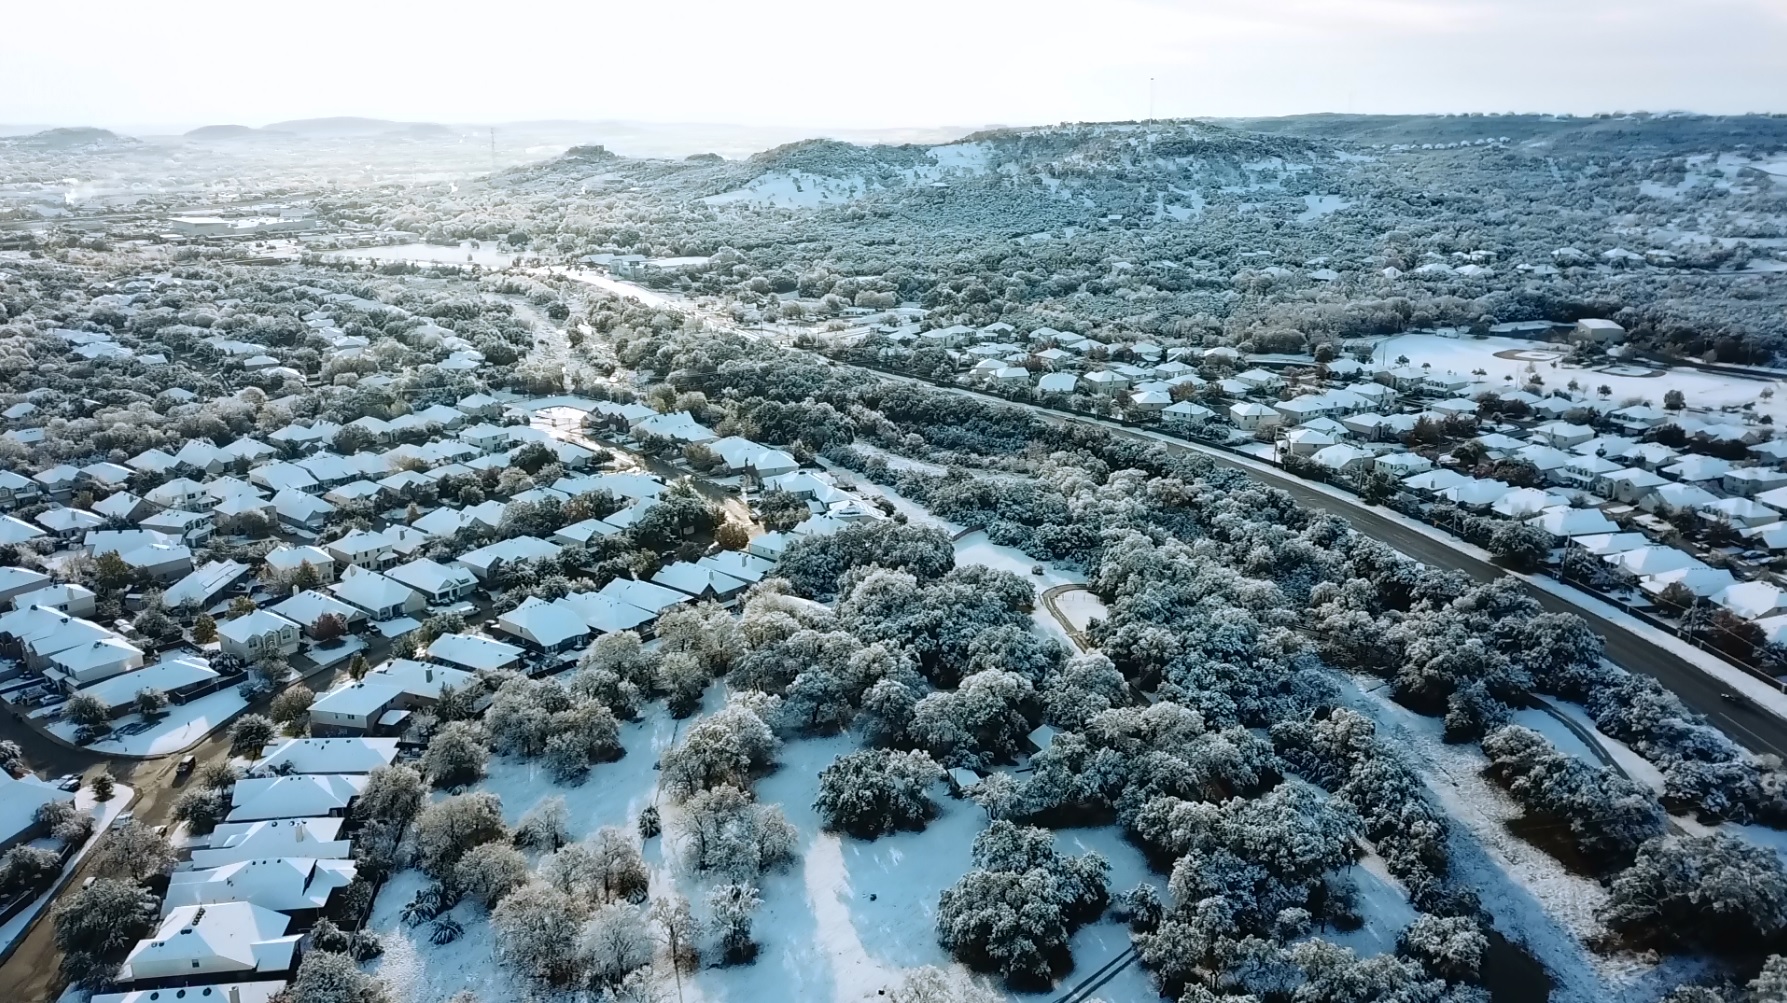 WATCH Drone footage shows magical snow scene over the San Antonio area